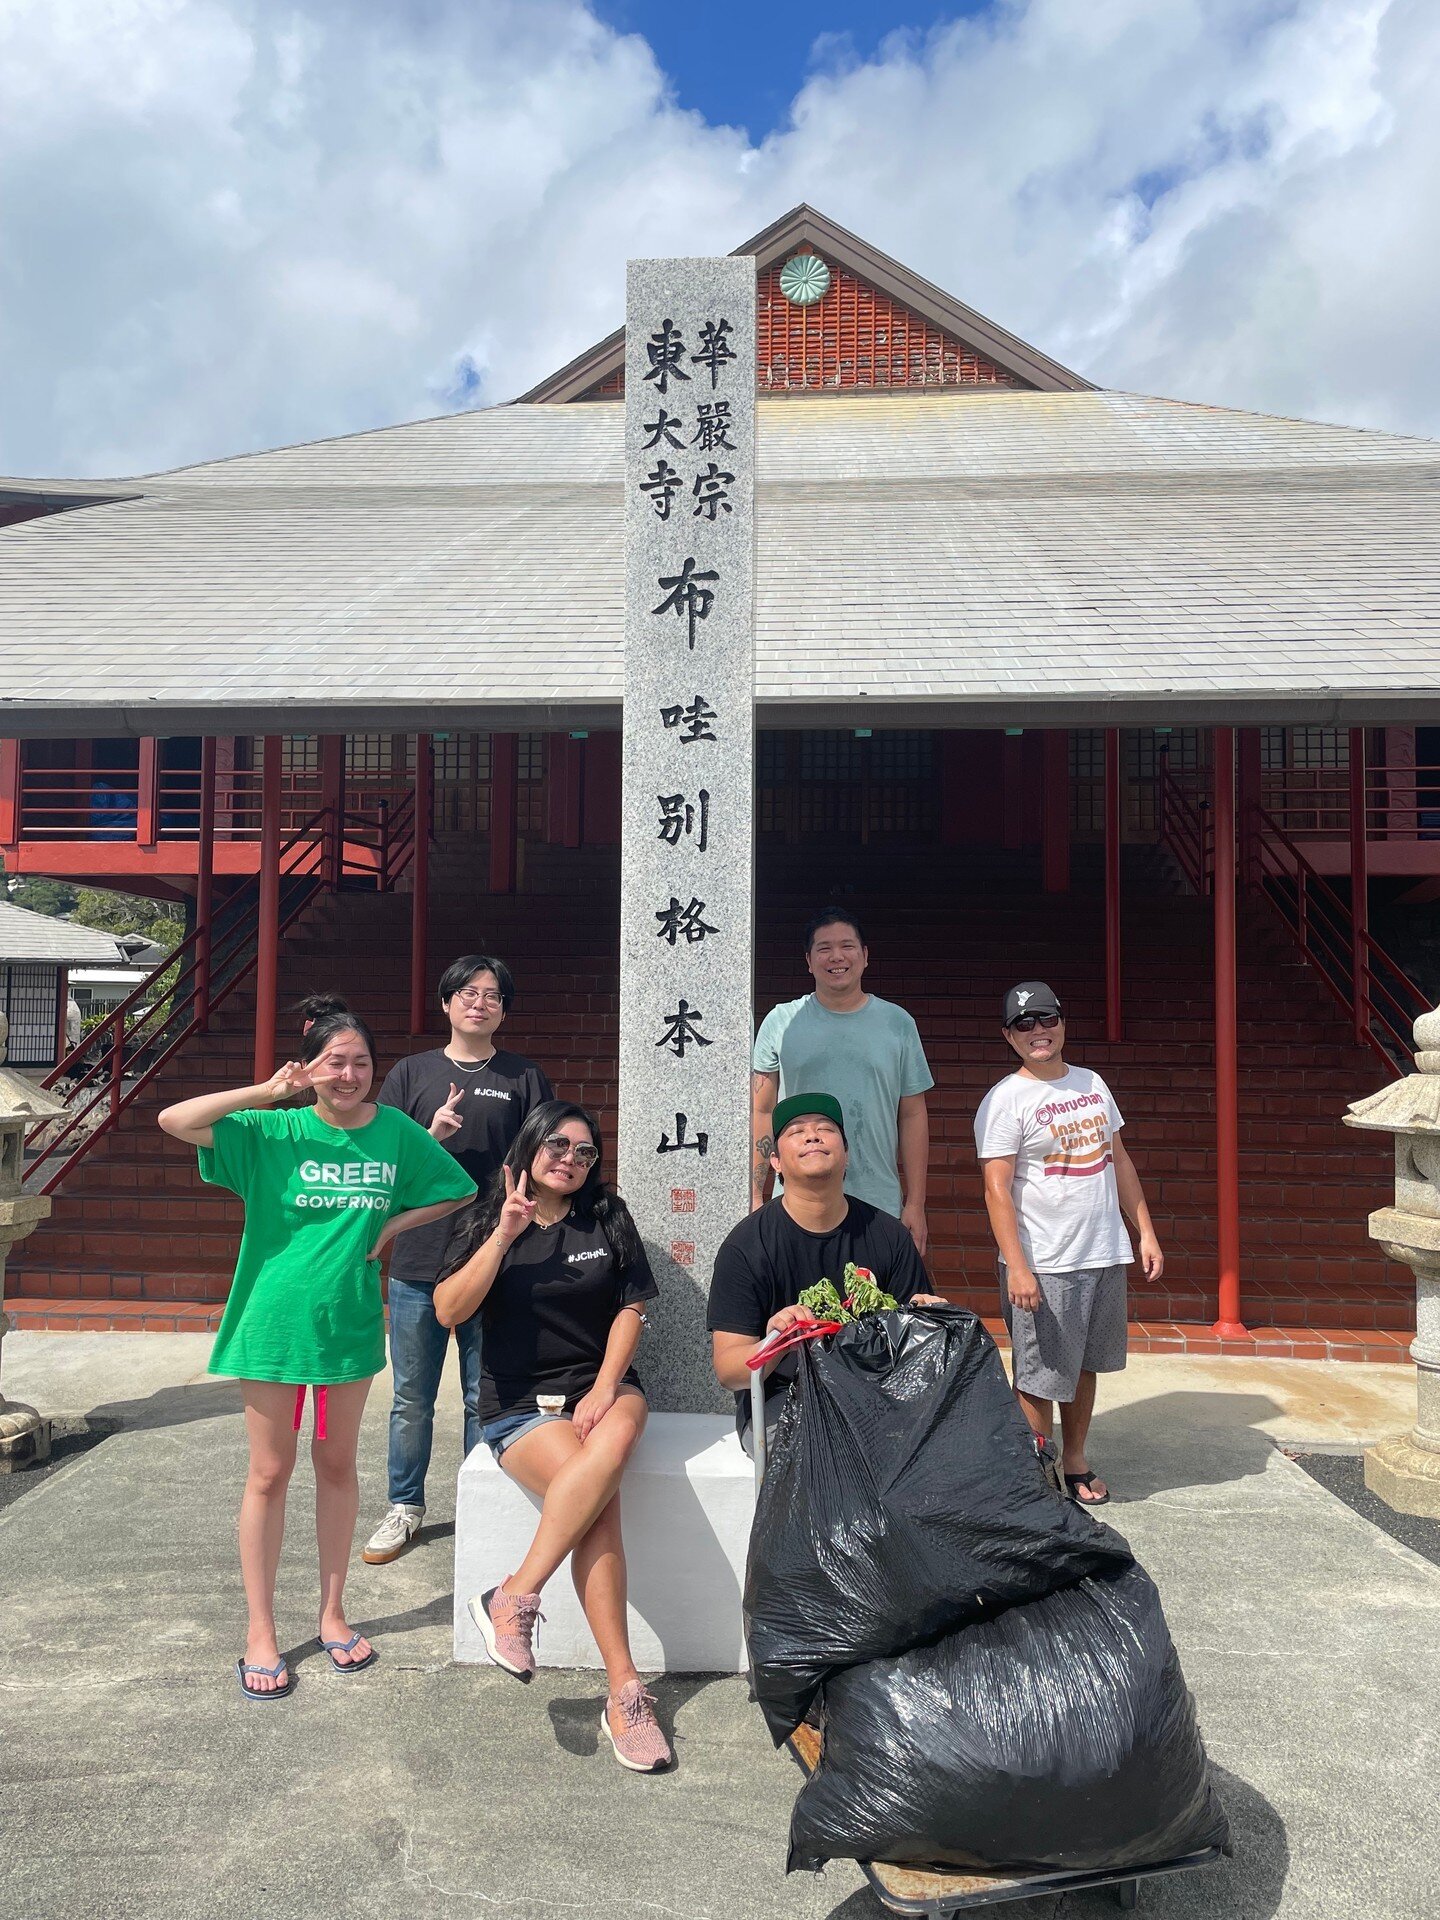 A big thank you to all who showed up to our first Adopt-A-Temple. Thank you @todaijihawaii for all the support throughout the years. 

#communityservice #JCI #JCIHonolulu #JCIHawaii #cleanup